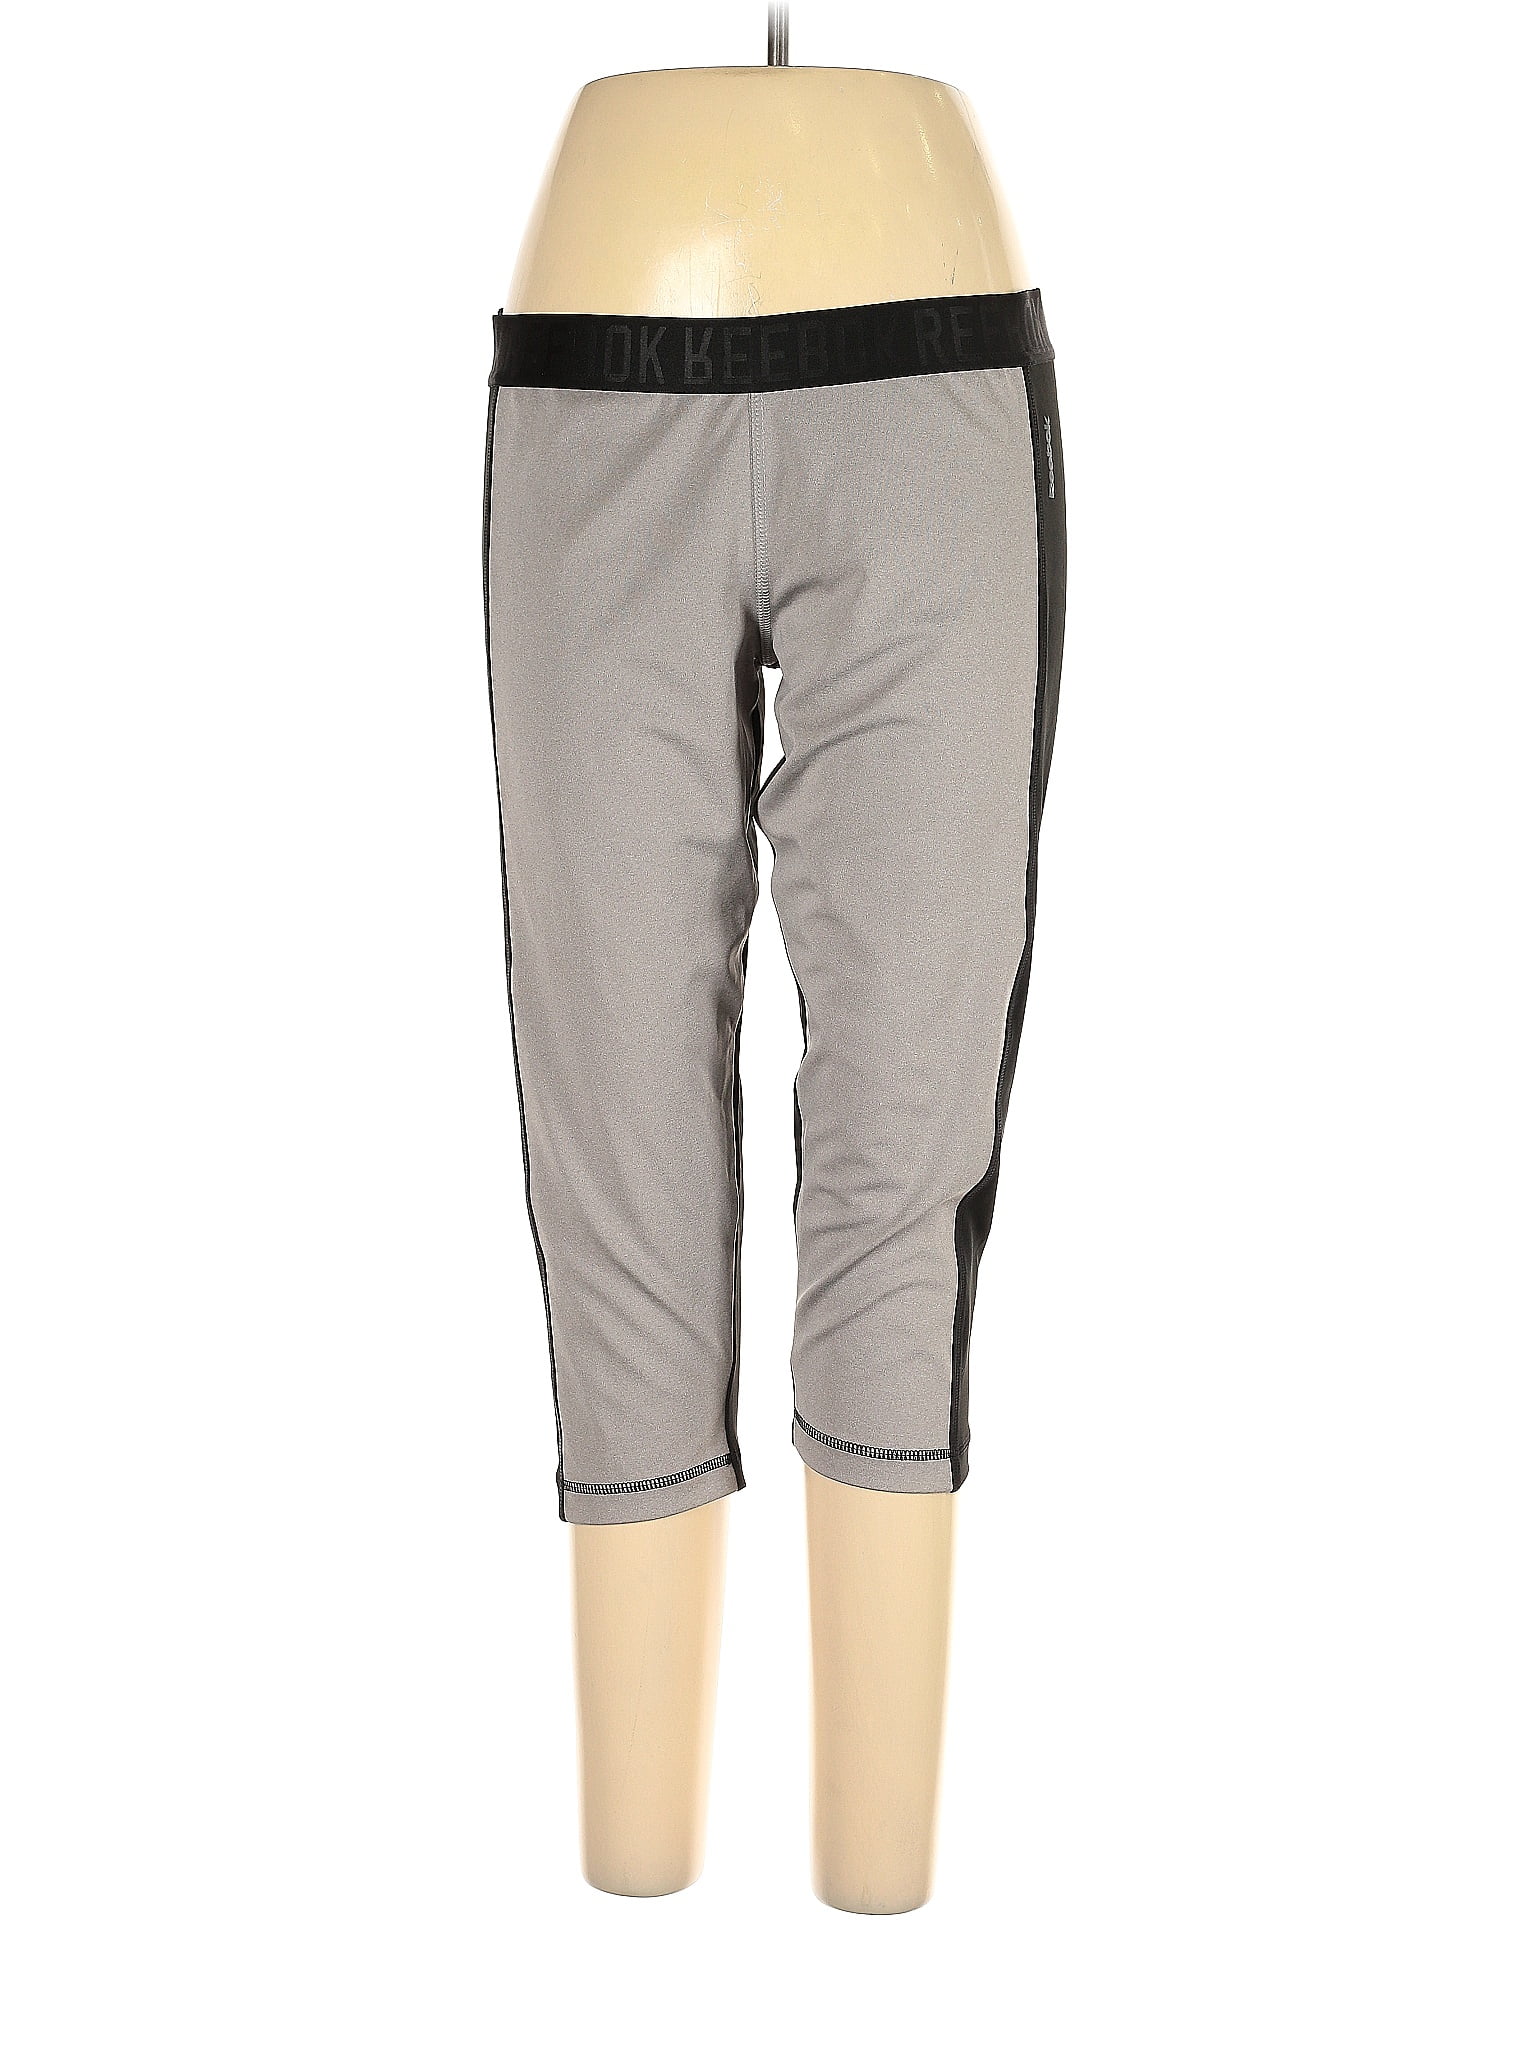 Zyia Active Gray Active Pants Size M - 56% off